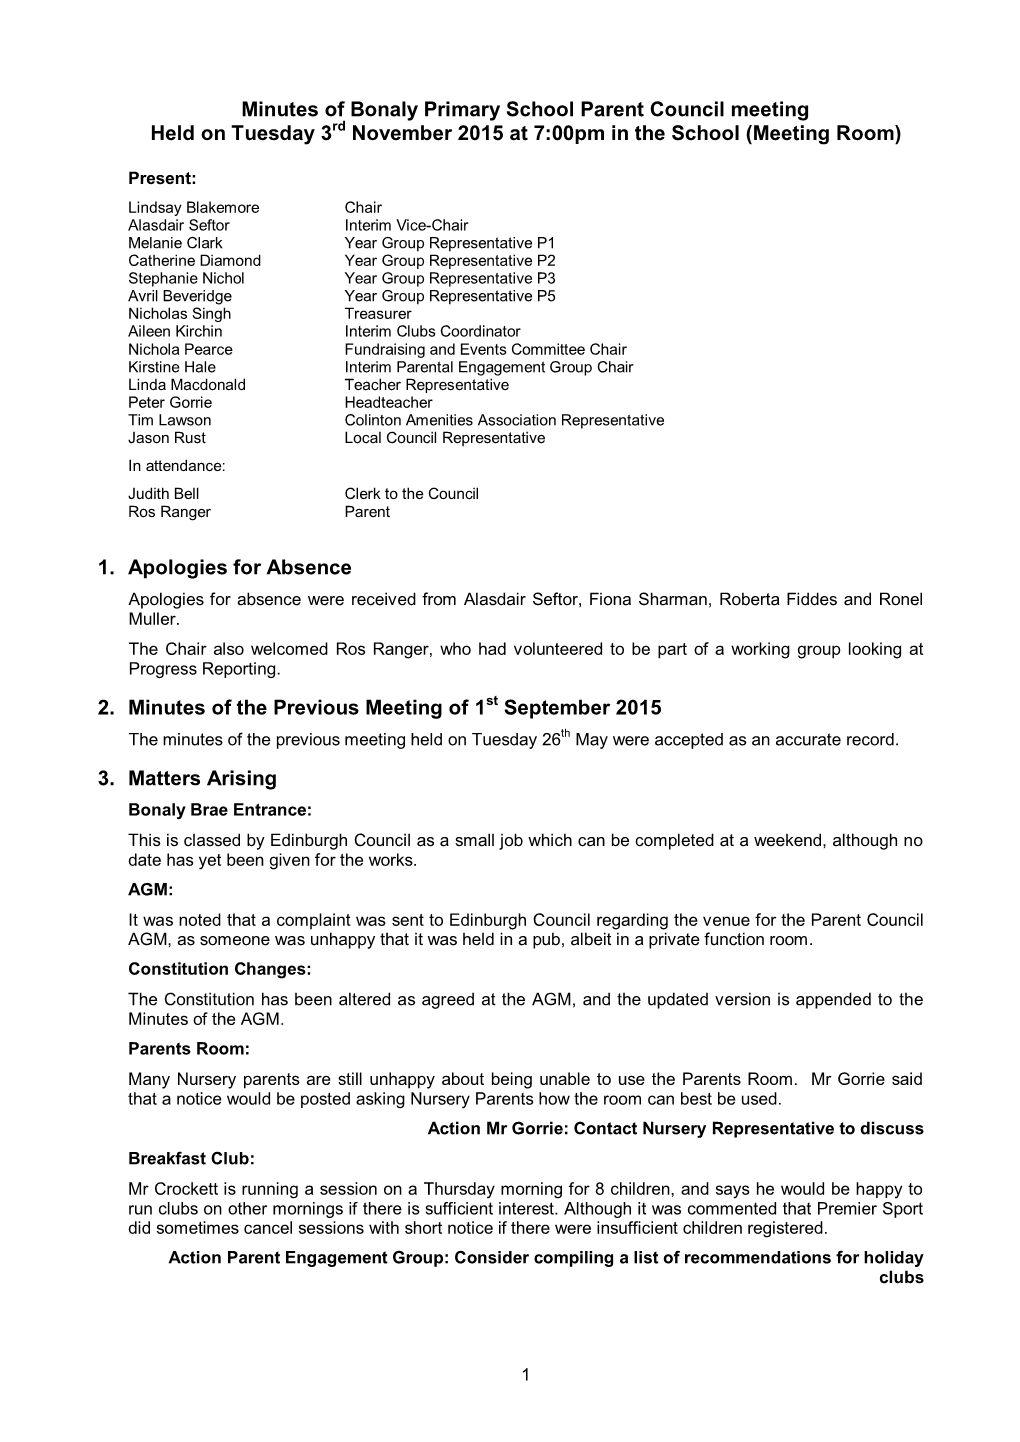 Minutes of Bonaly Primary School Parent Council Meeting Held on Tuesday 3Rd November 2015 at 7:00Pm in the School (Meeting Room)